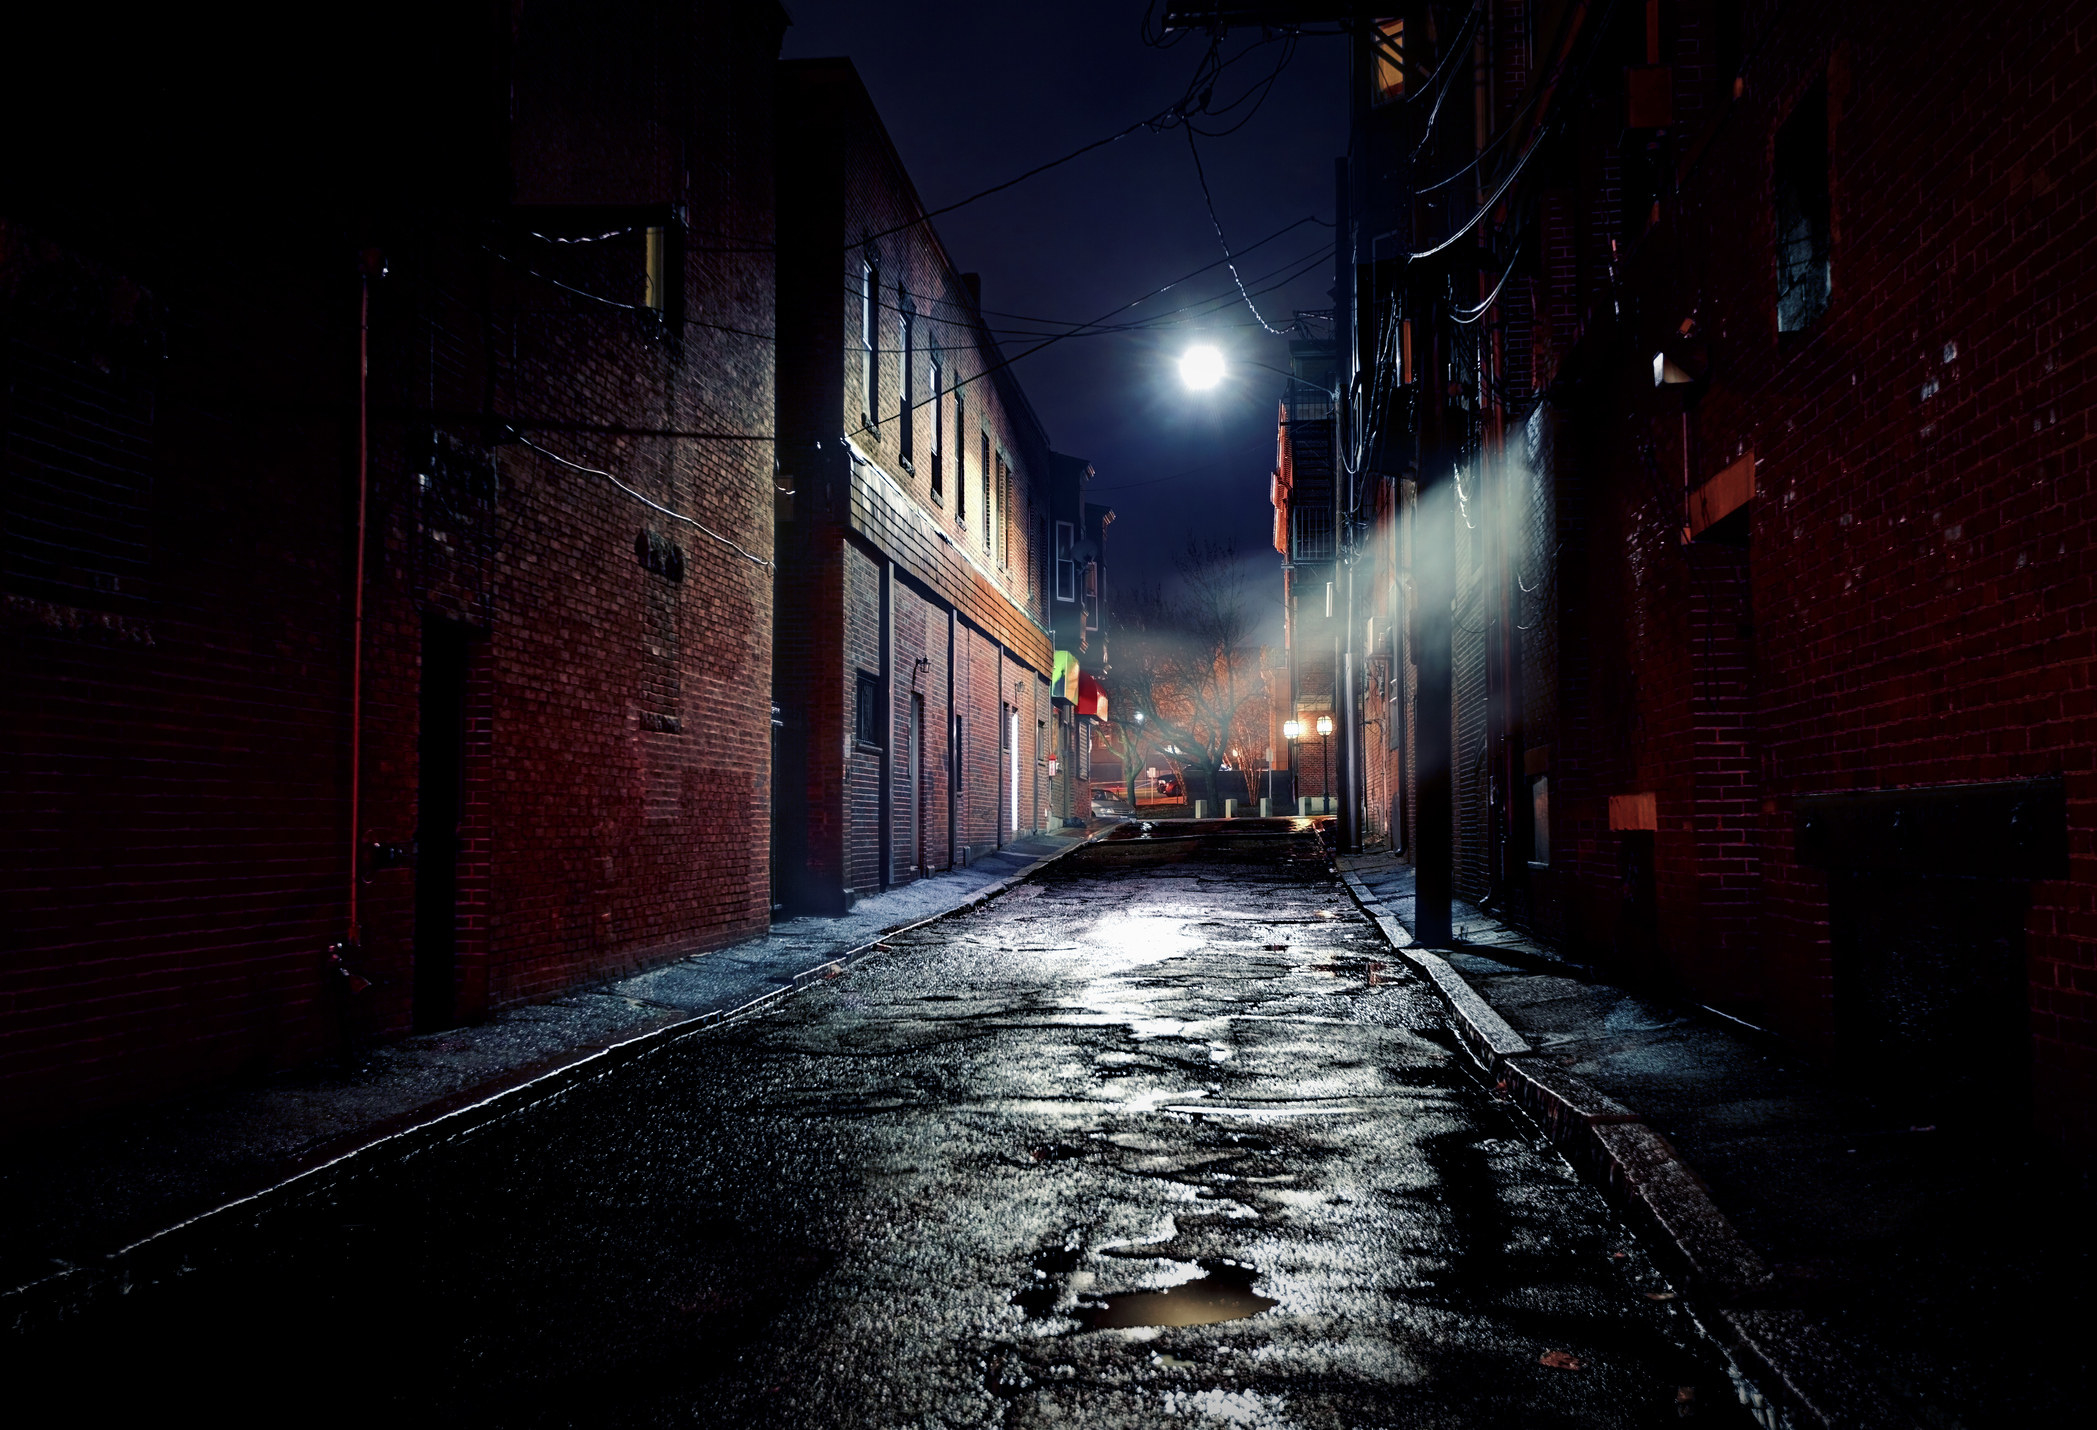 Long, dark gritty alley between two old, derelict buildings at night